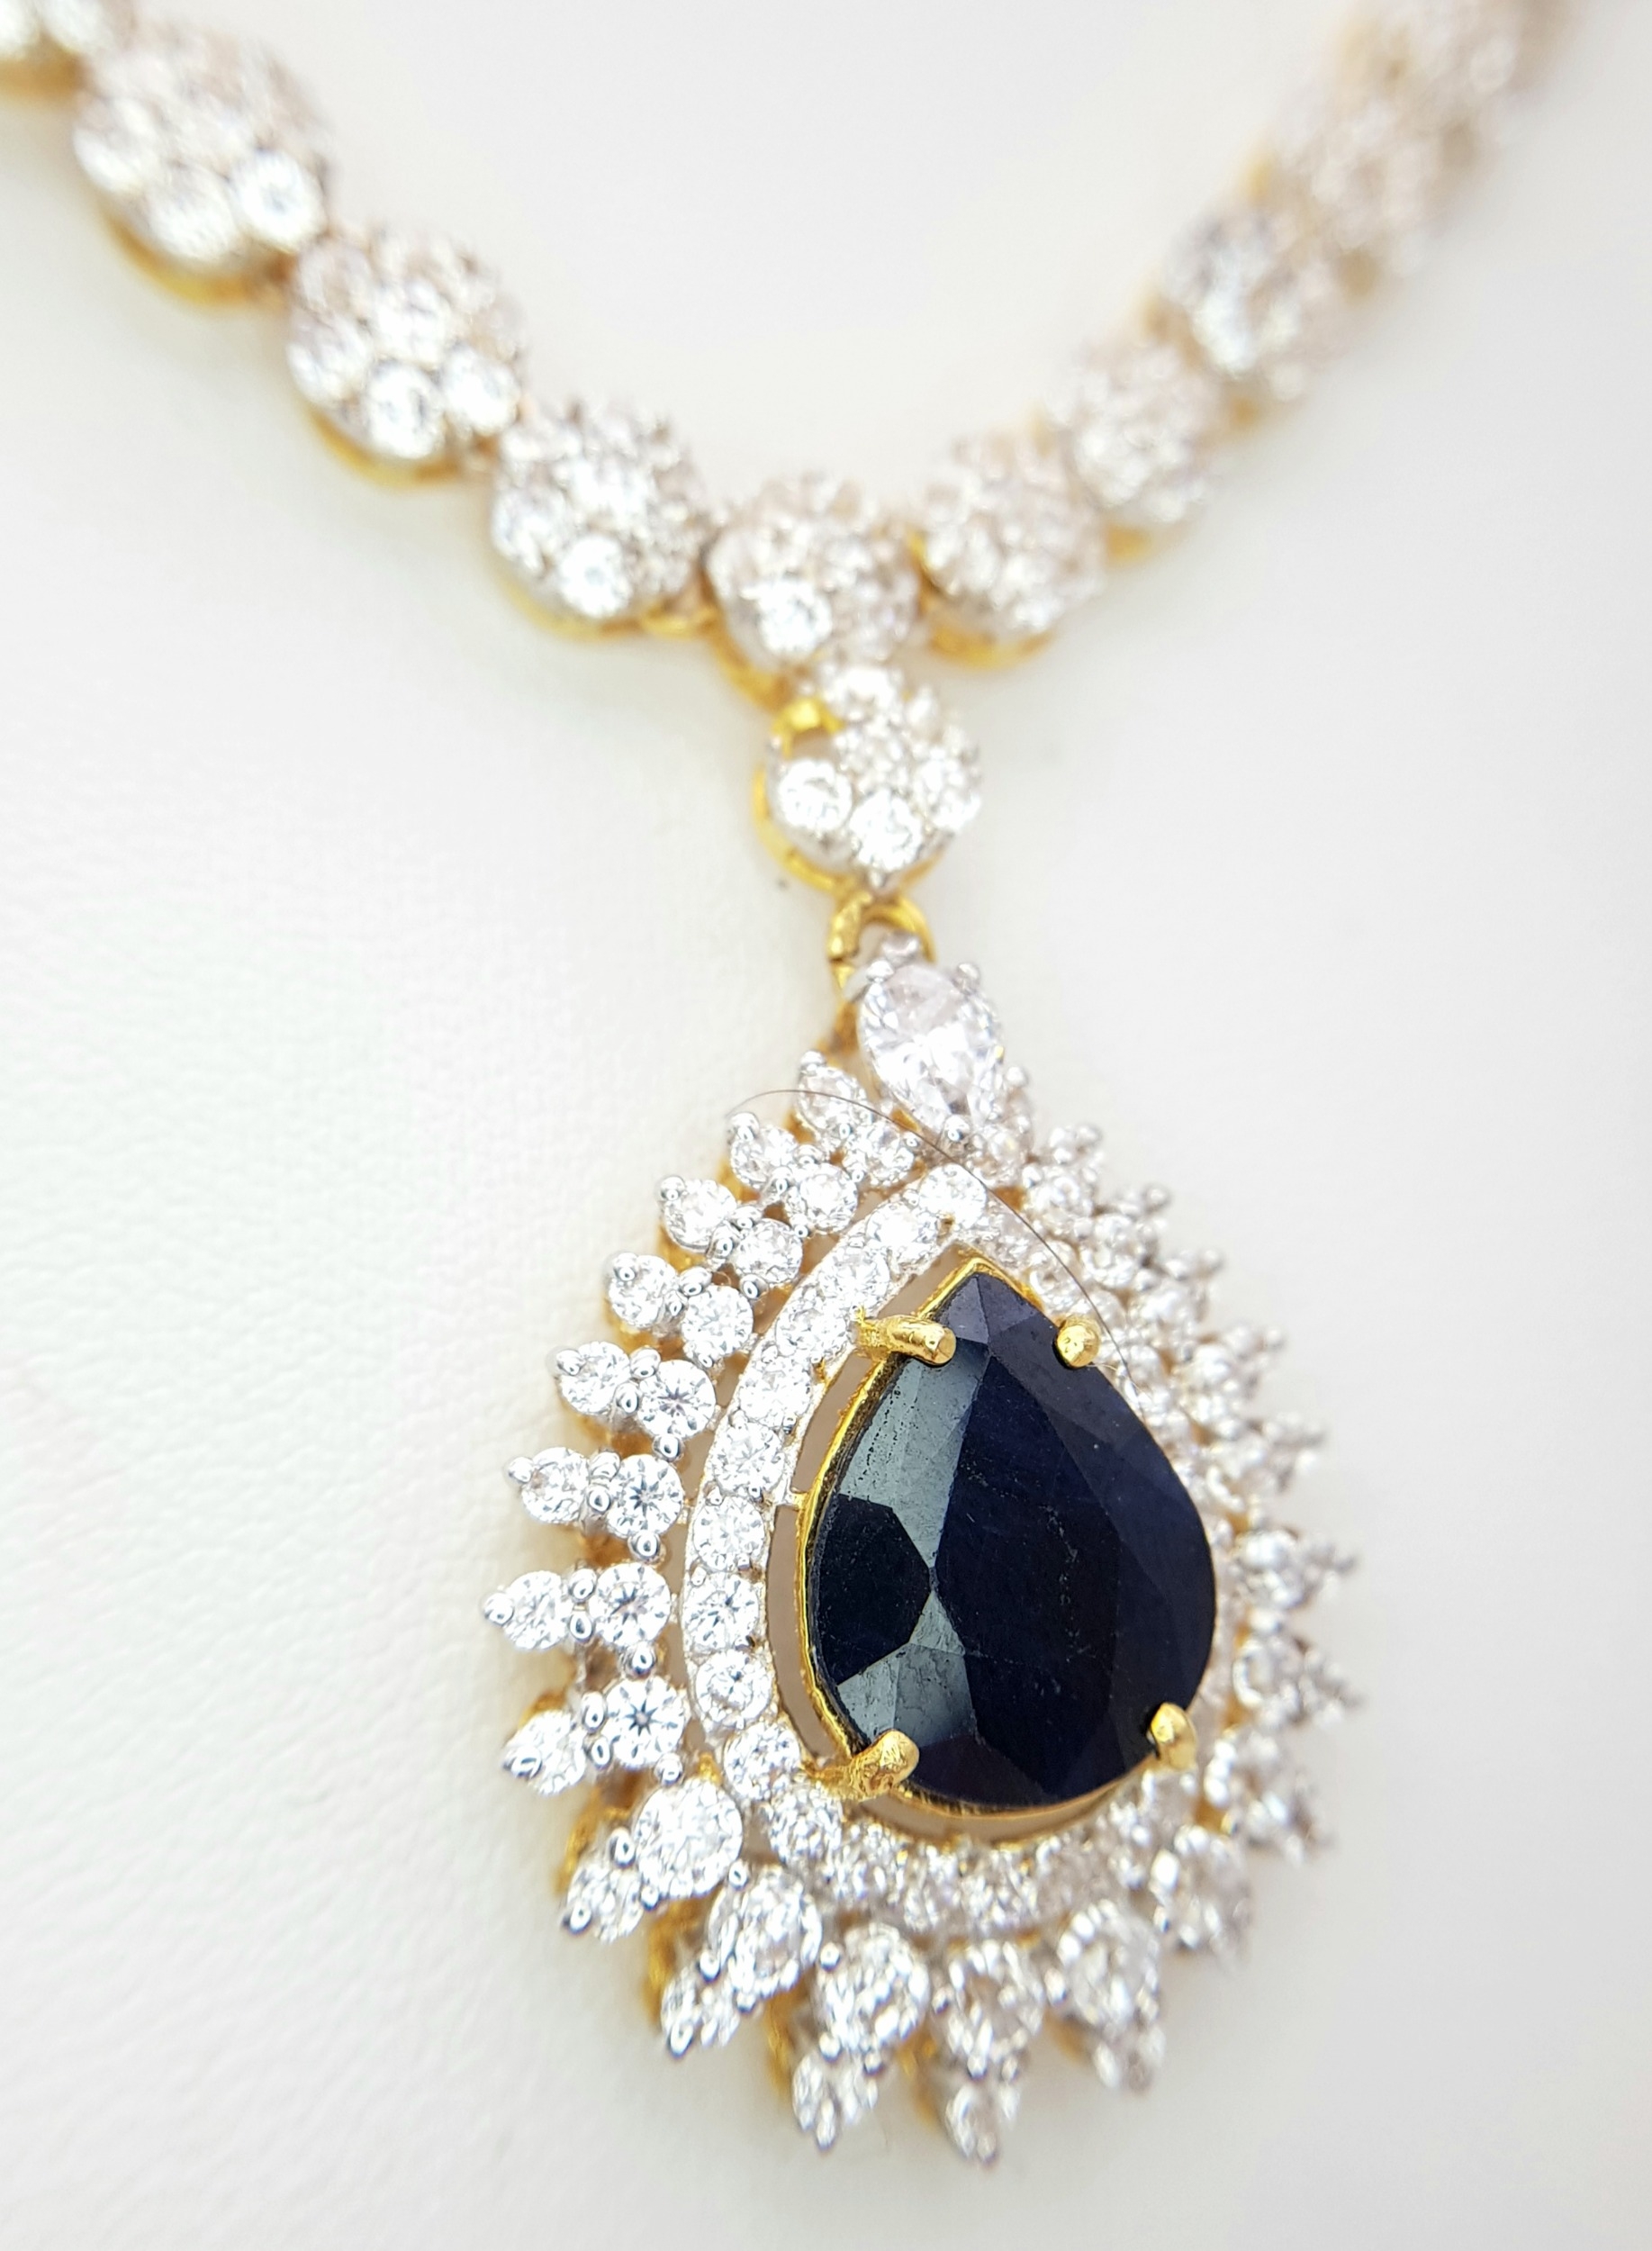 A Fabulous Jewellery Lot! A 21K Rich Yellow Gold Diamond and White Stone (one missing) Necklace with - Image 2 of 8